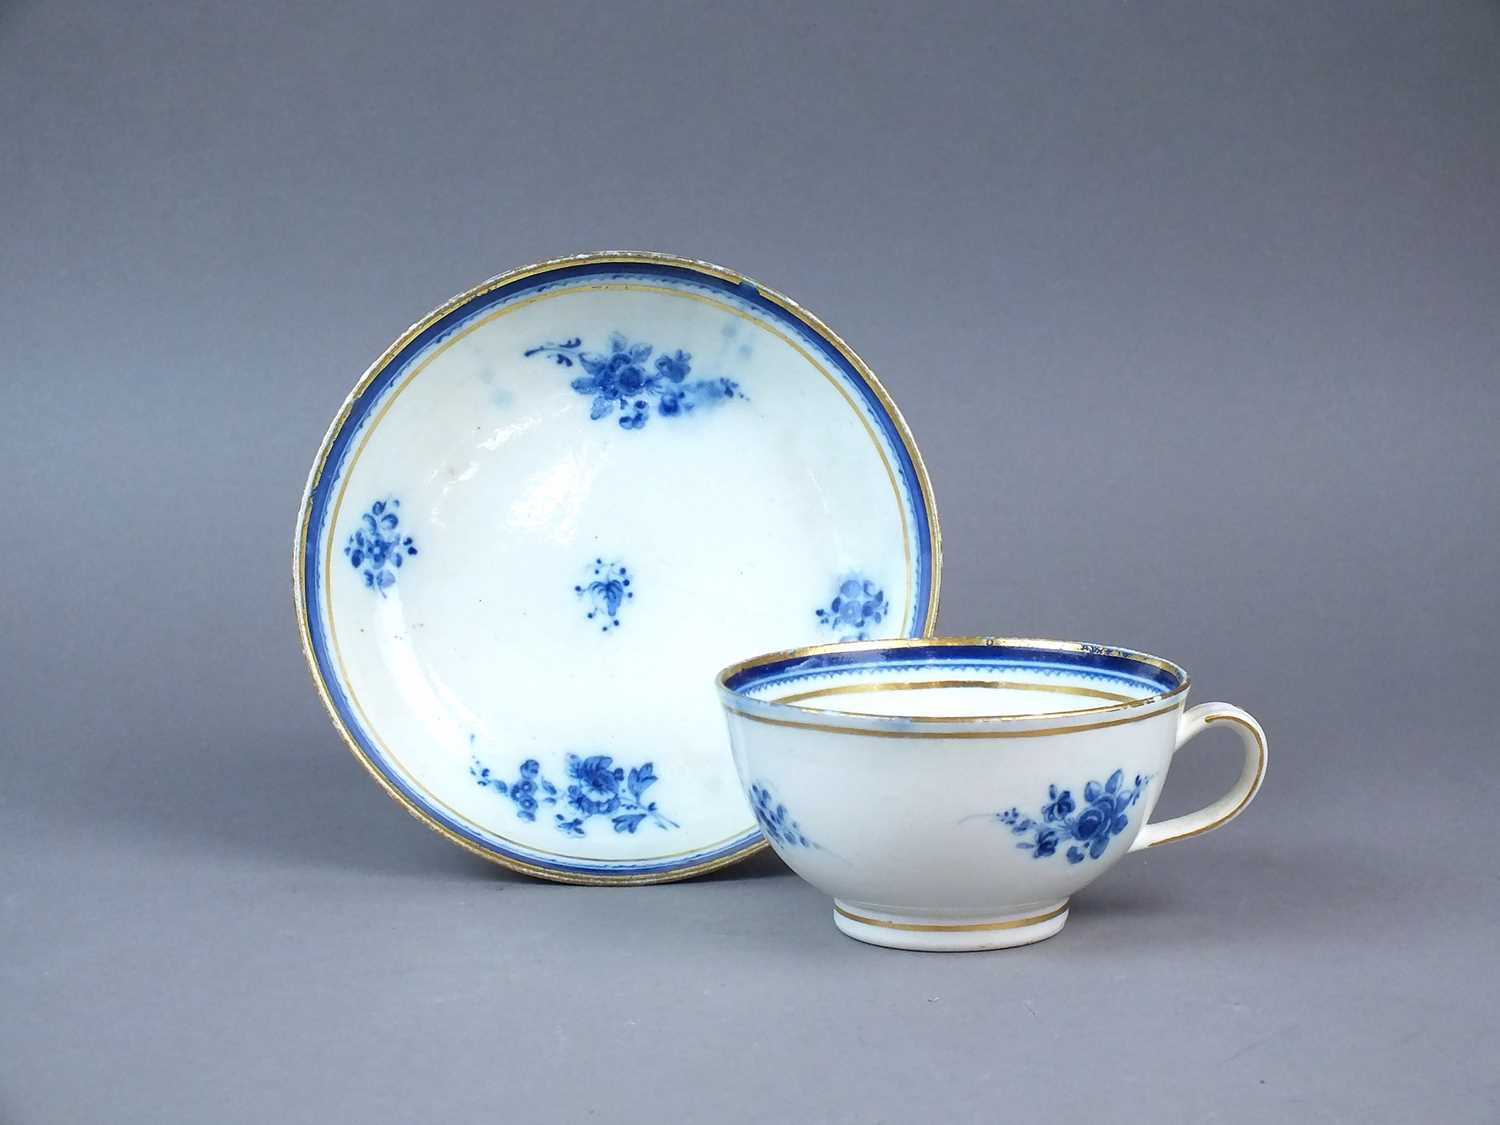 Lot 205 - A Caughley 'Salopian Sprigs' breakfast cup and saucer, circa 1785-95